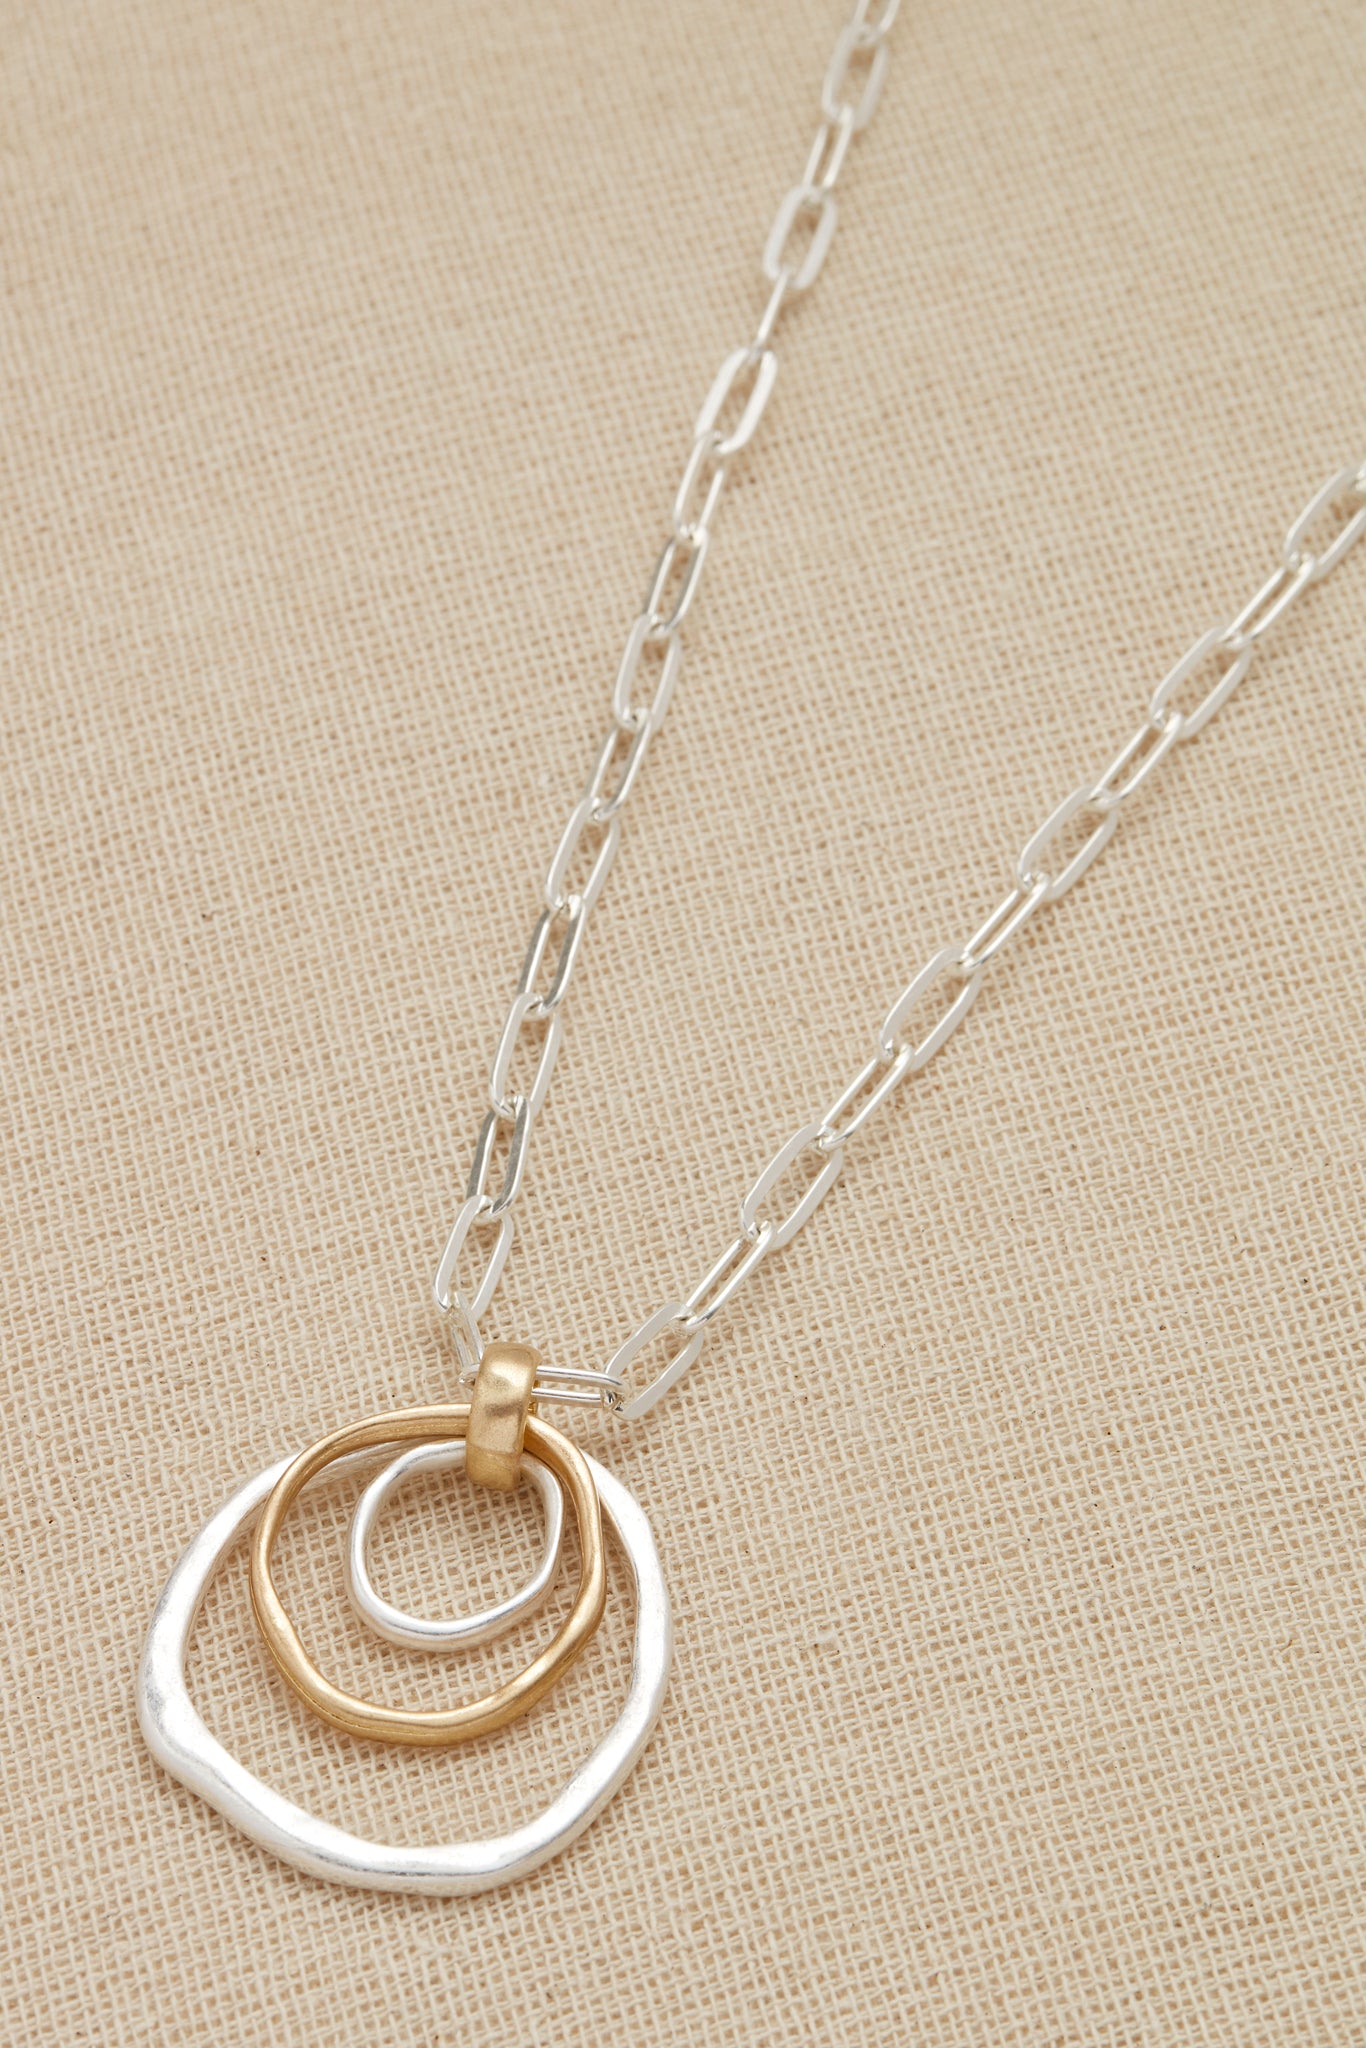 Long silver Necklace with Two-Tone Open Circles Pendant